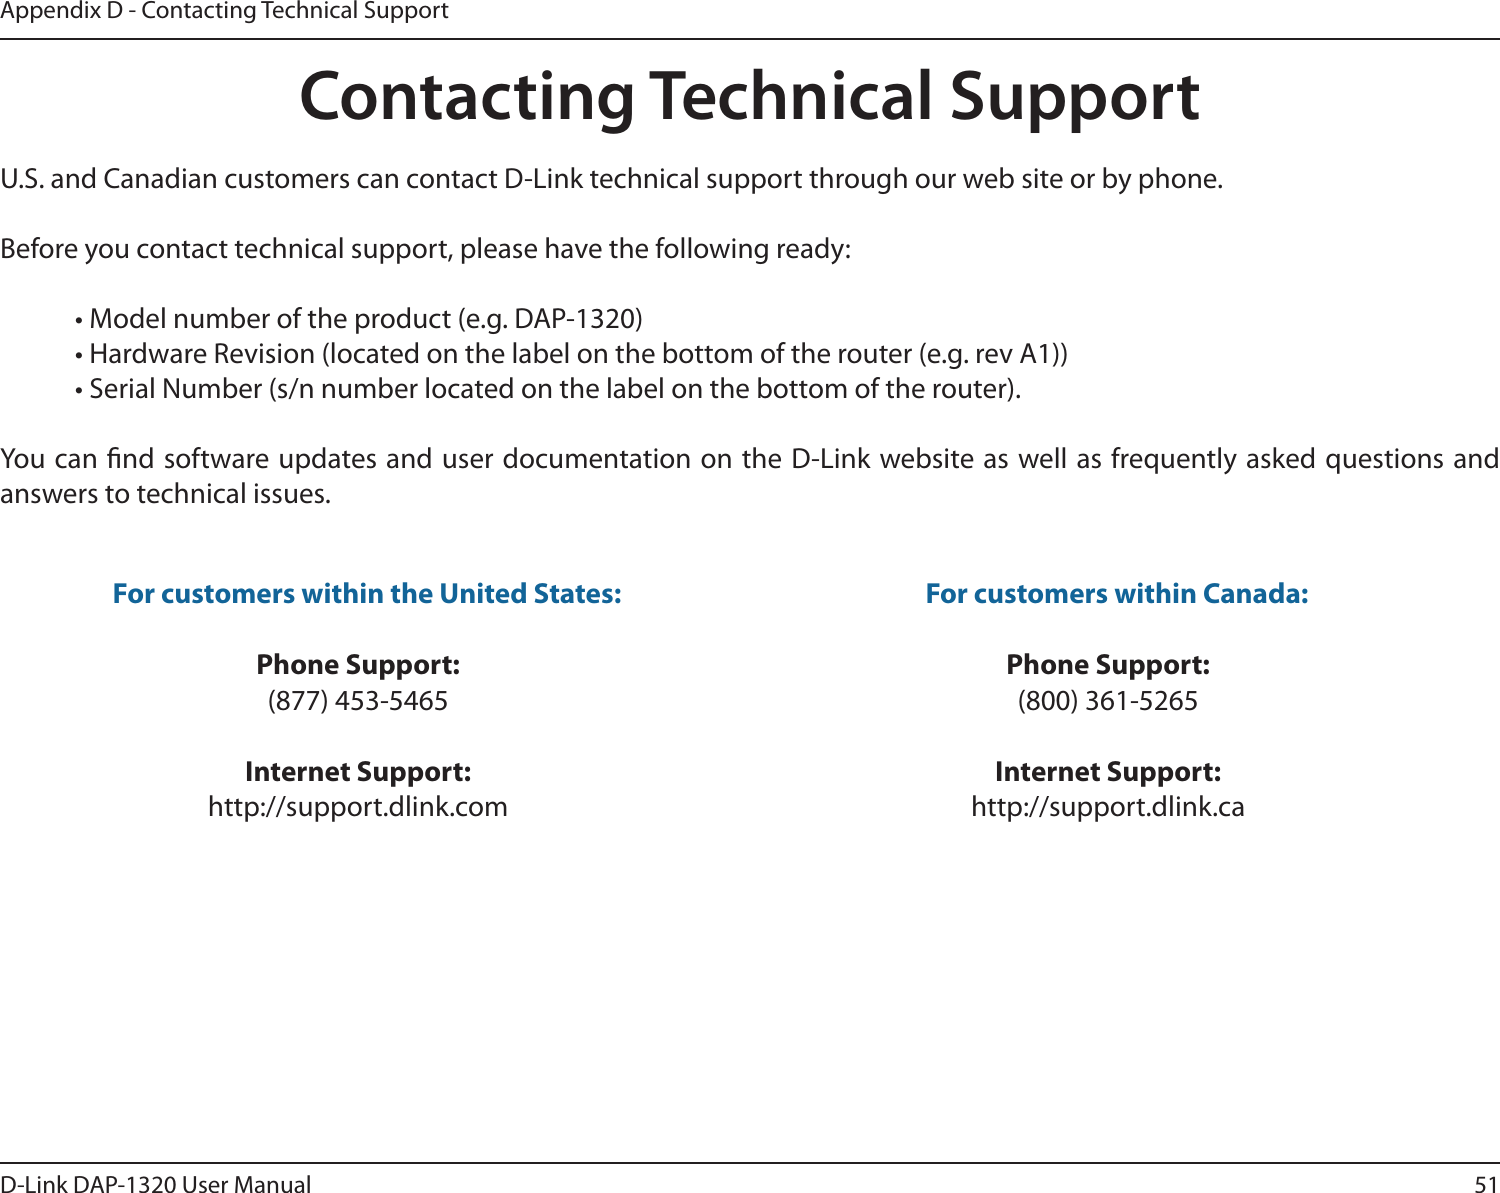 51D-Link DAP-1320 User ManualAppendix D - Contacting Technical SupportContacting Technical SupportU.S. and Canadian customers can contact D-Link technical support through our web site or by phone.Before you contact technical support, please have the following ready:  • Model number of the product (e.g. DAP-1320)  • Hardware Revision (located on the label on the bottom of the router (e.g. rev A1))  • Serial Number (s/n number located on the label on the bottom of the router). You can nd software updates and user documentation on the D-Link website as well as frequently asked questions and answers to technical issues.For customers within the United States: Phone Support:(877) 453-5465Internet Support:http://support.dlink.com For customers within Canada: Phone Support:(800) 361-5265Internet Support:http://support.dlink.ca 